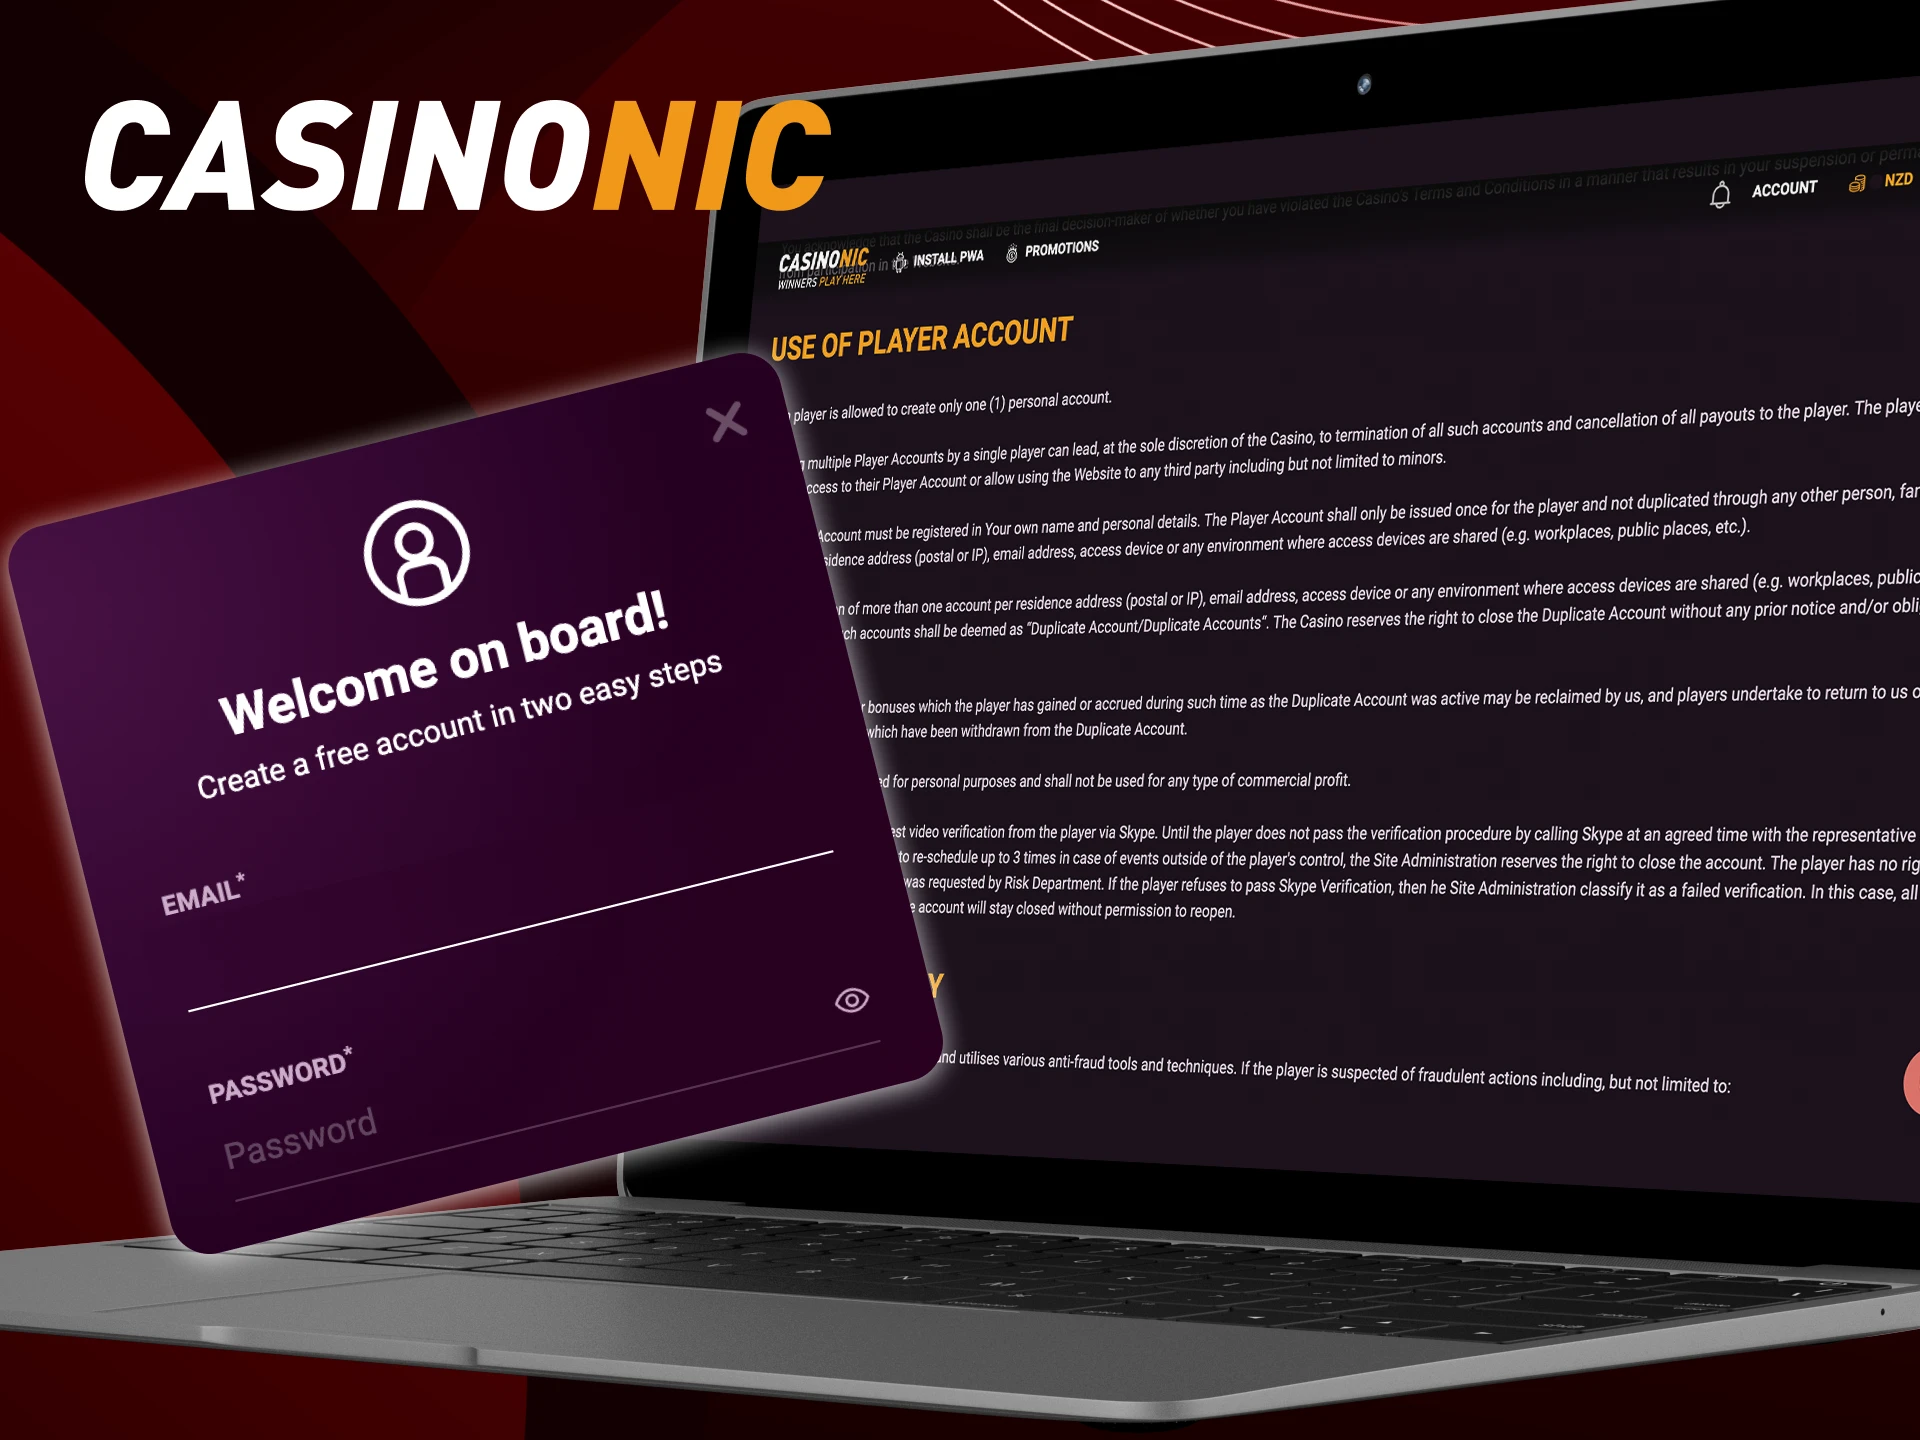 What are the conditions for creating a new account in the online casino CasinoNic.